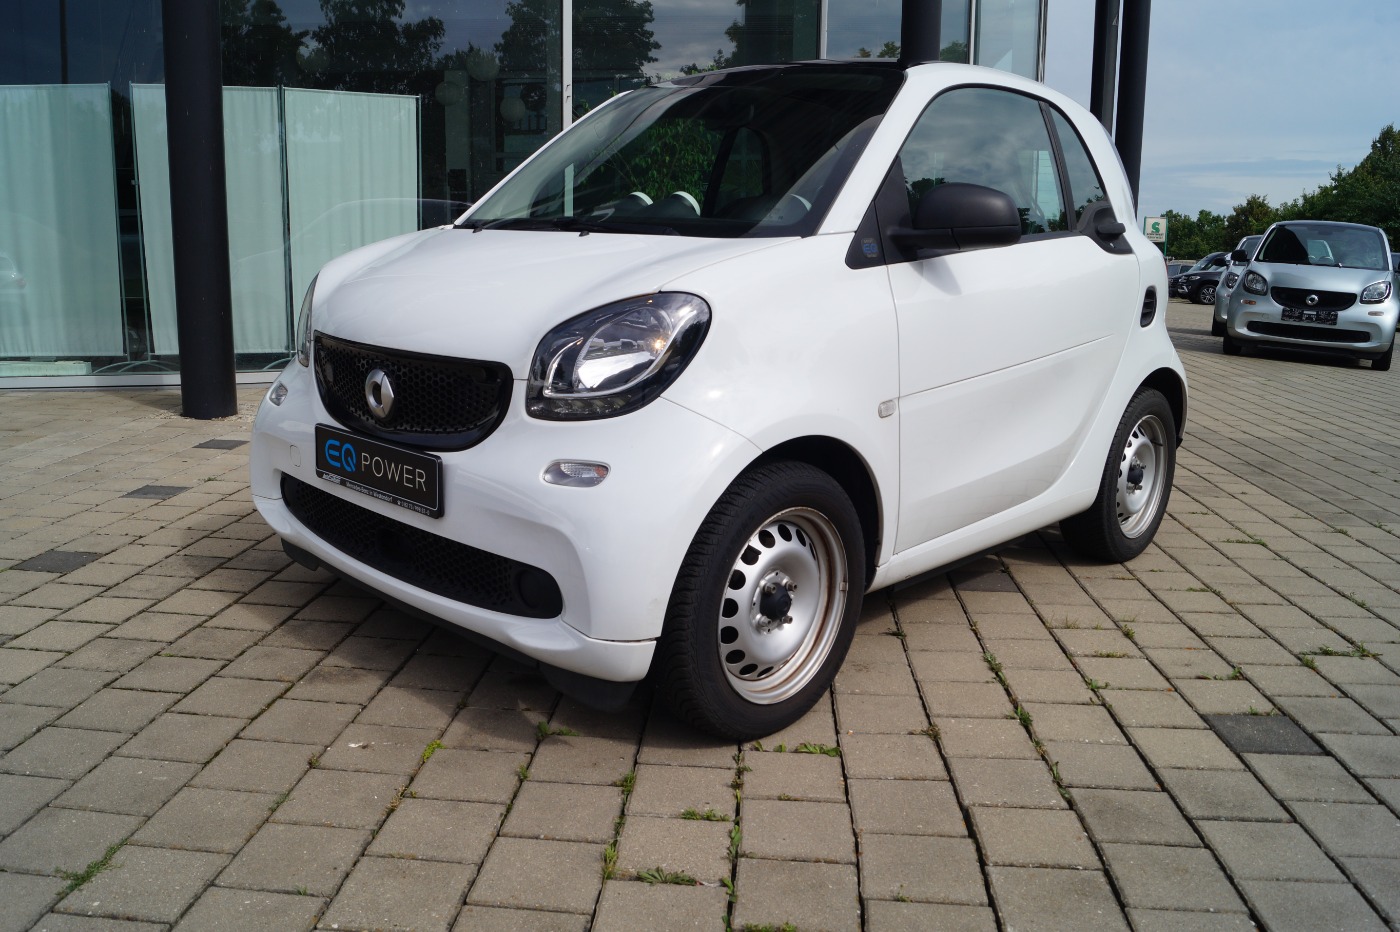 smart EQ fortwo LEATHER-